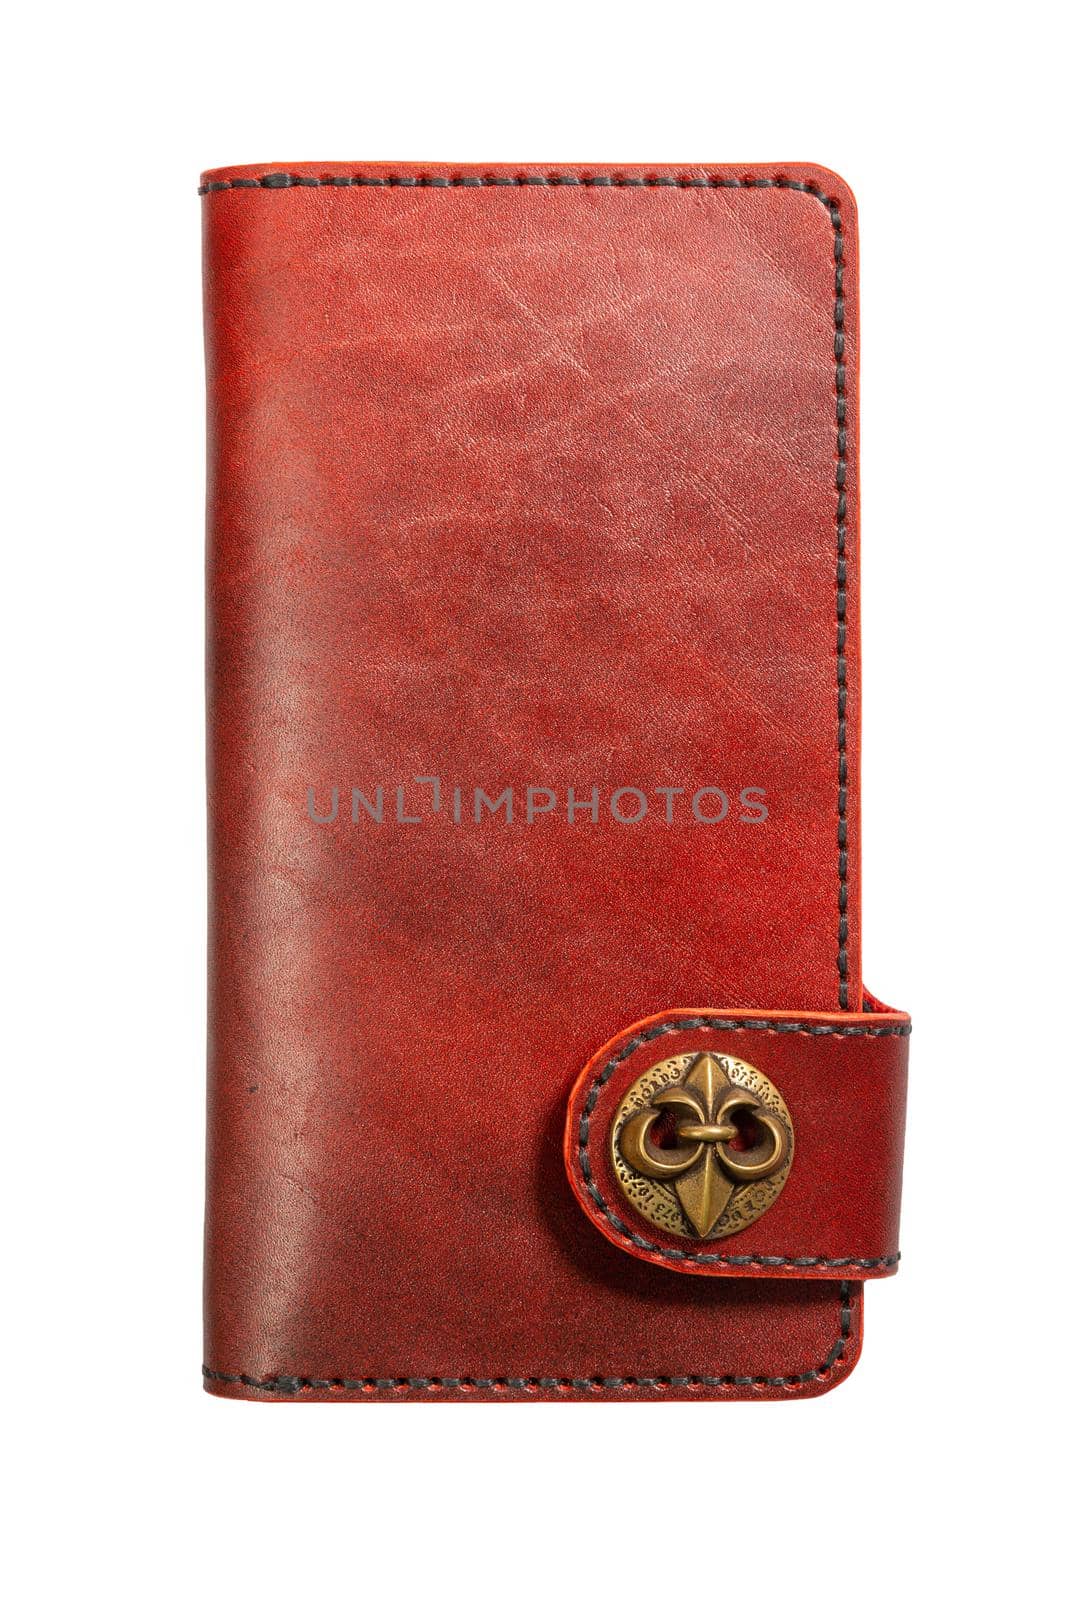 Red natural leather women wallet isolated on white background.